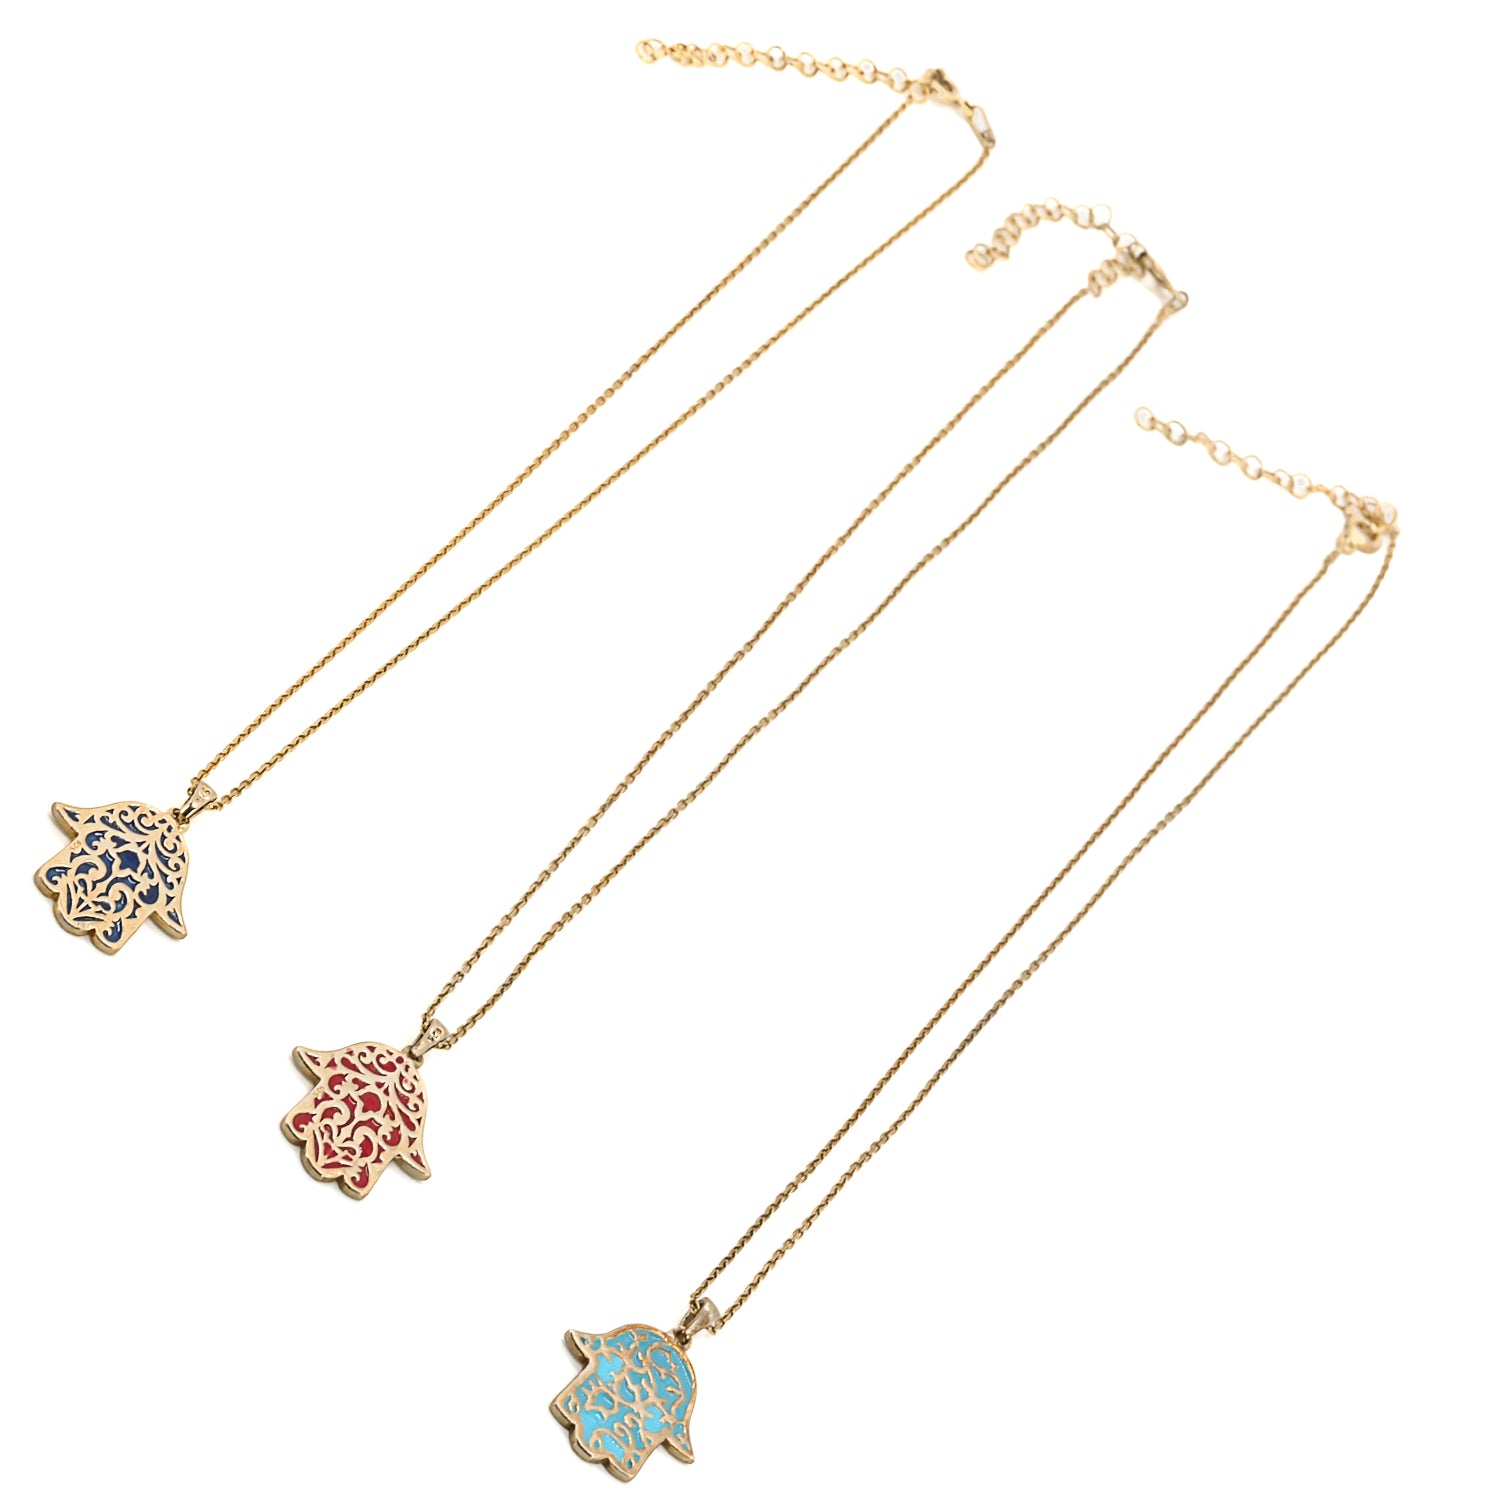 Adorn yourself with the Stay Positive Hamsa Necklace, a symbol of protection and happiness, featuring a beautiful hamsa pendant made of sterling silver and 18K gold plating with enamel accents.